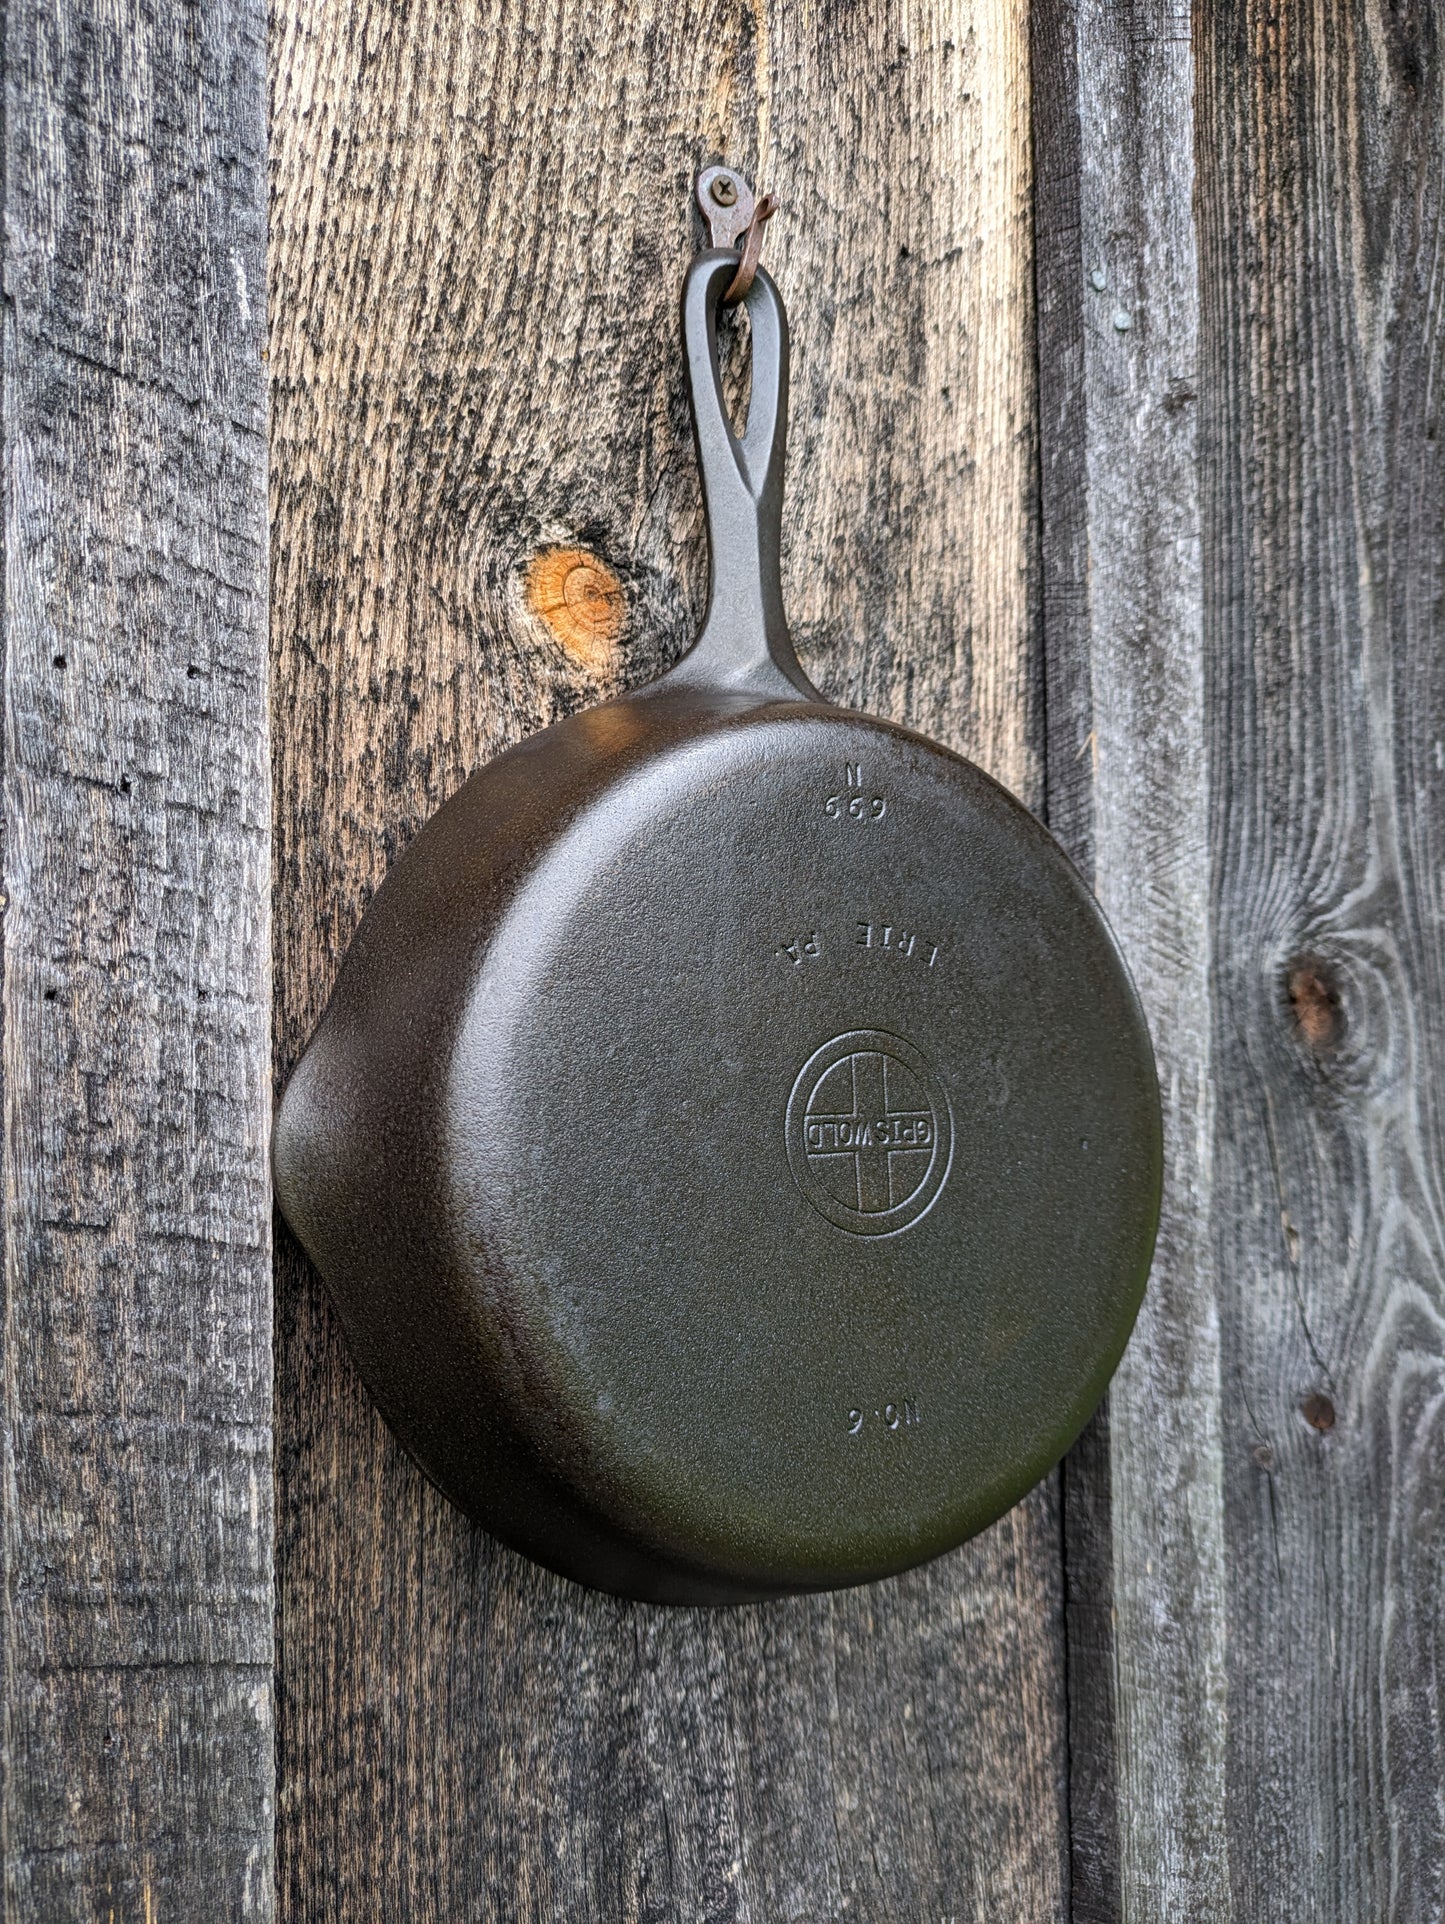 Griswold Small Block Logo #6 Cast Iron Skillet with Early Handle 699 N